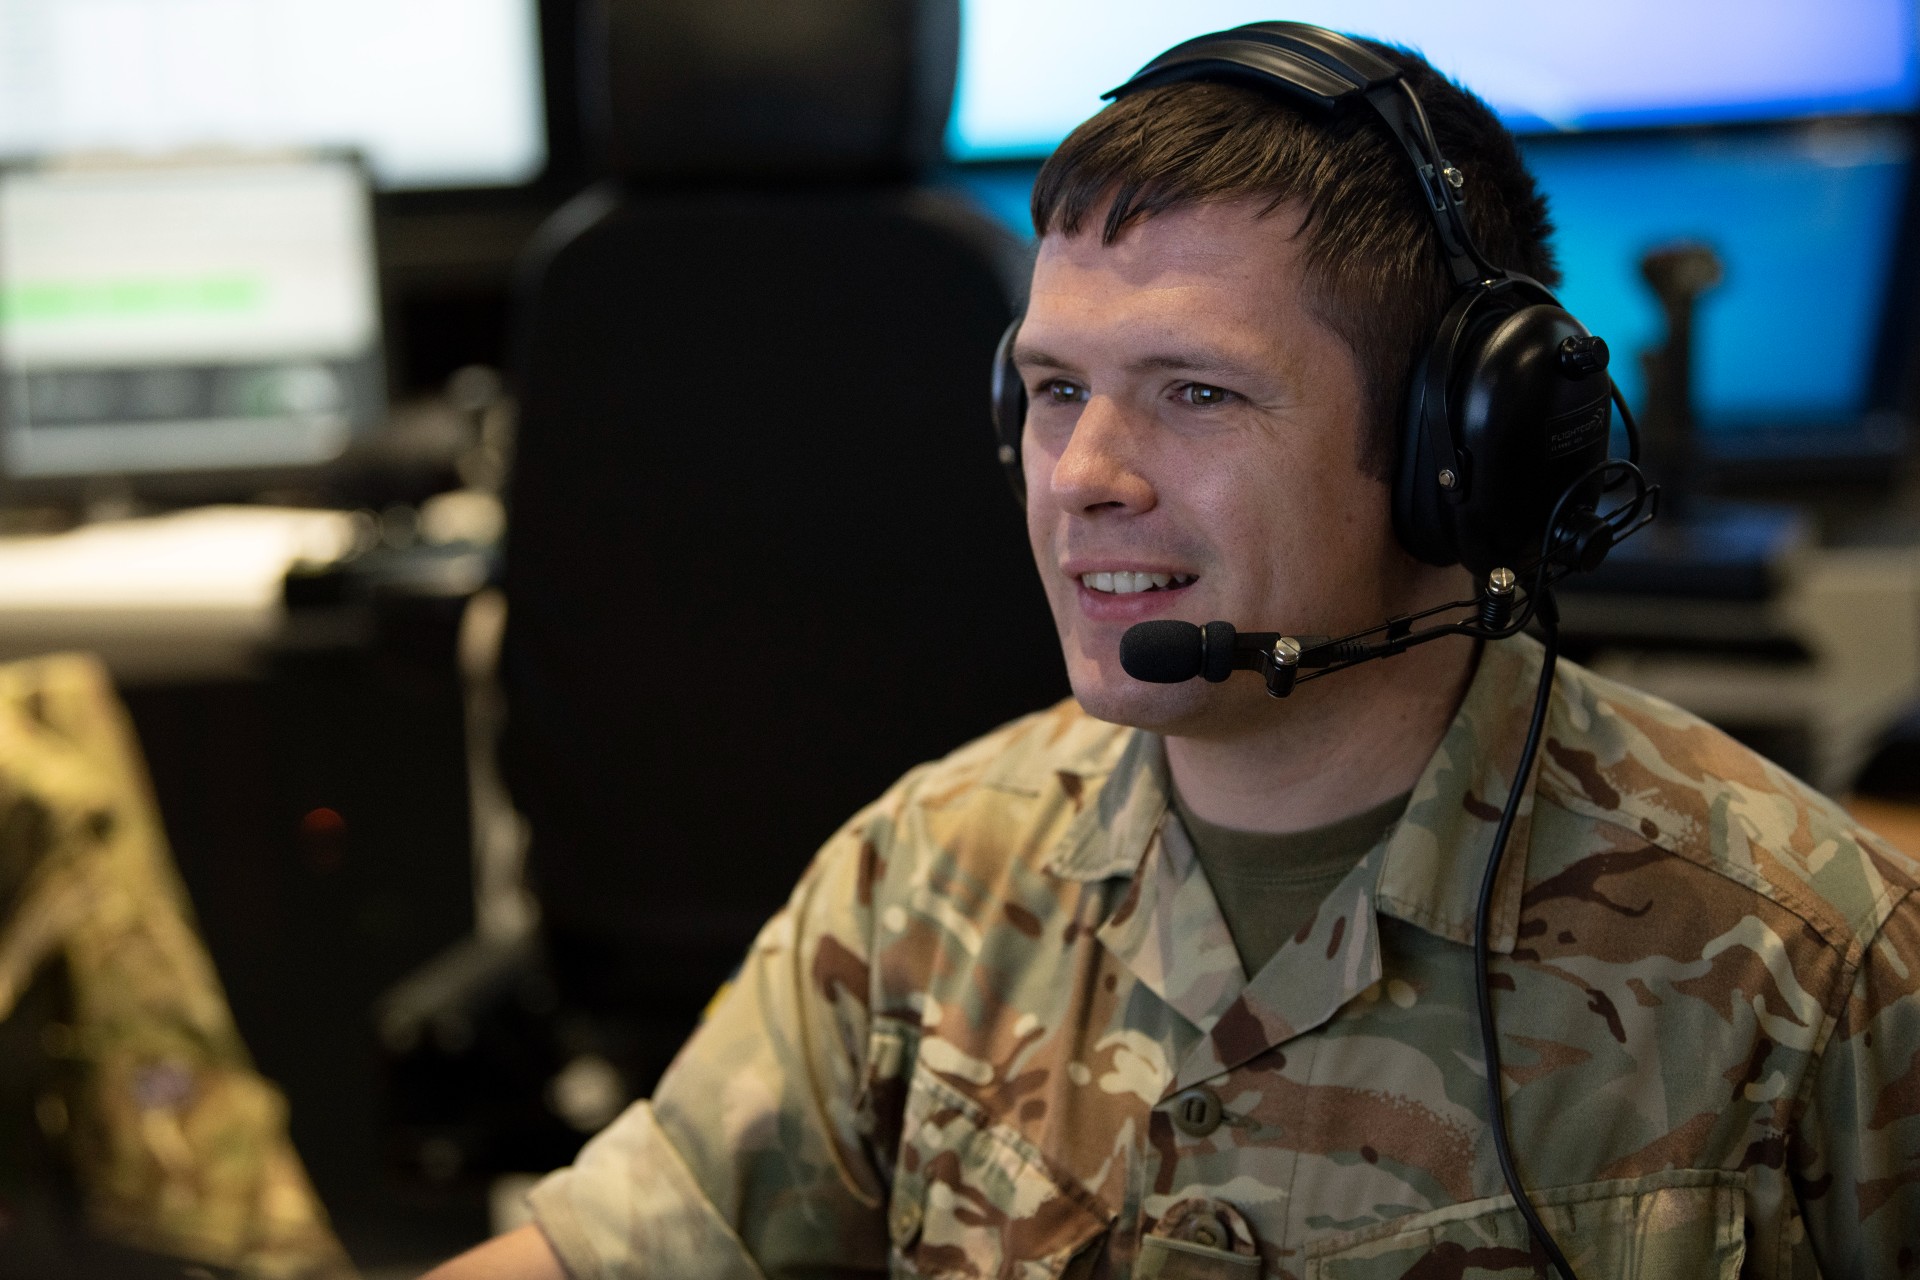 Man in Army uniform wearing a headset looking at a computer